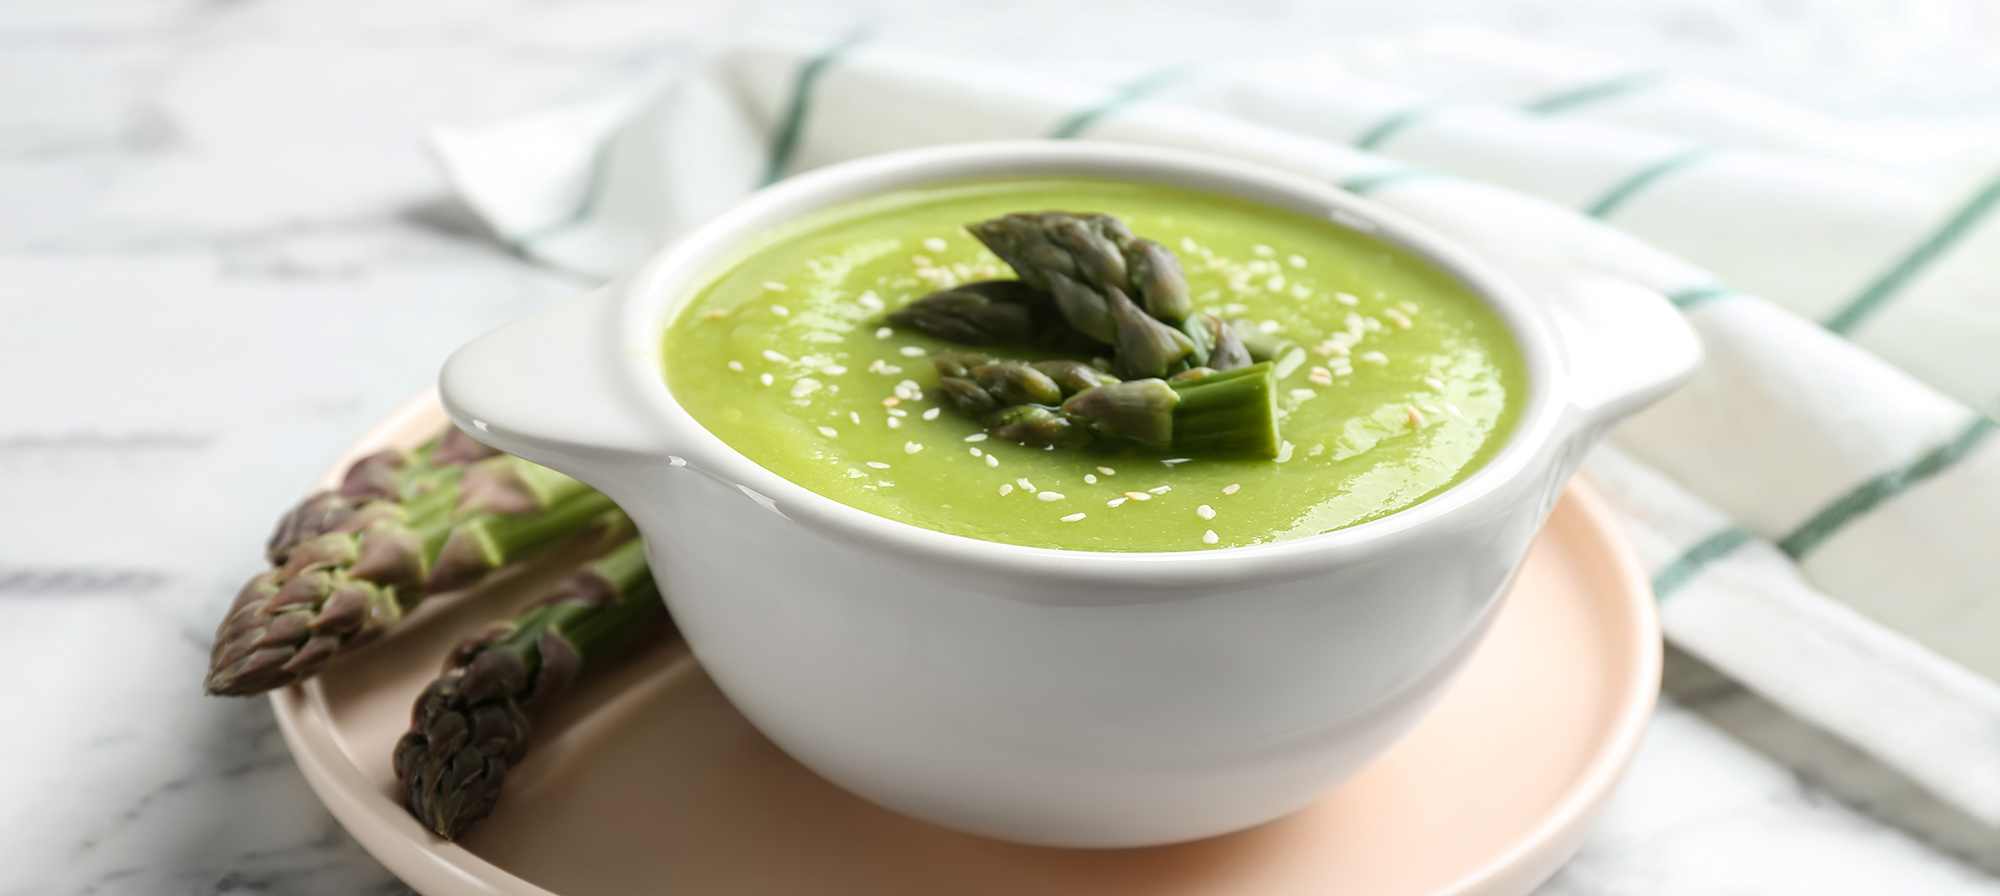 A Creamy Asparagus Soup Recipe That Won’t Pack on the Pounds